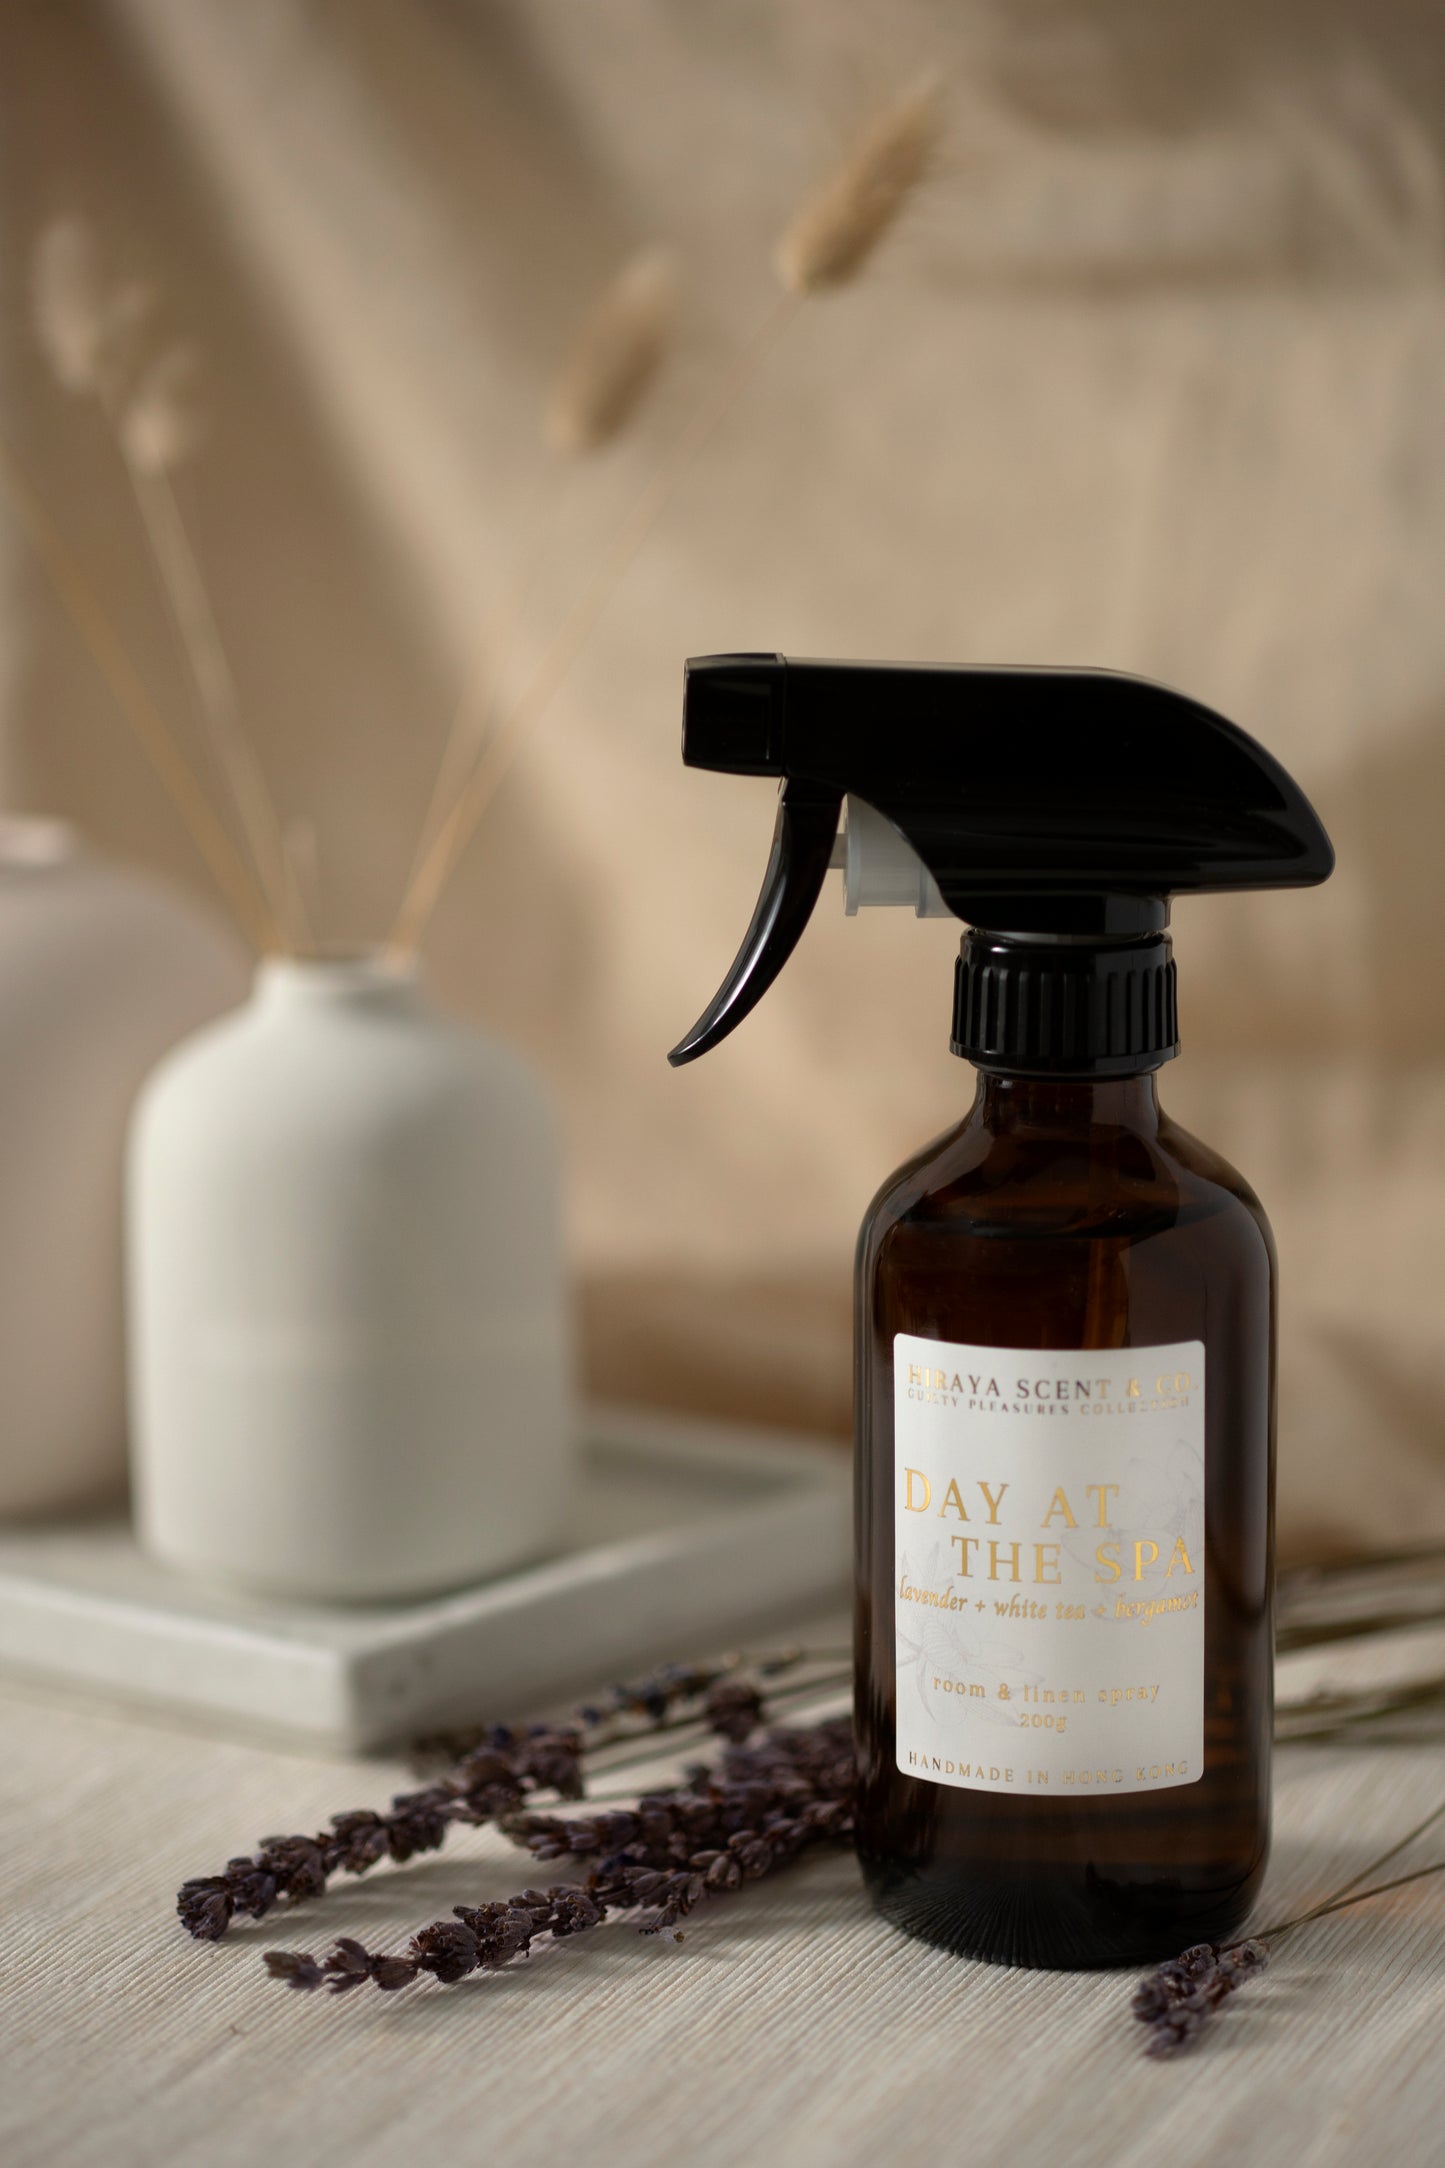 Day At The Spa Room/Linen Spray